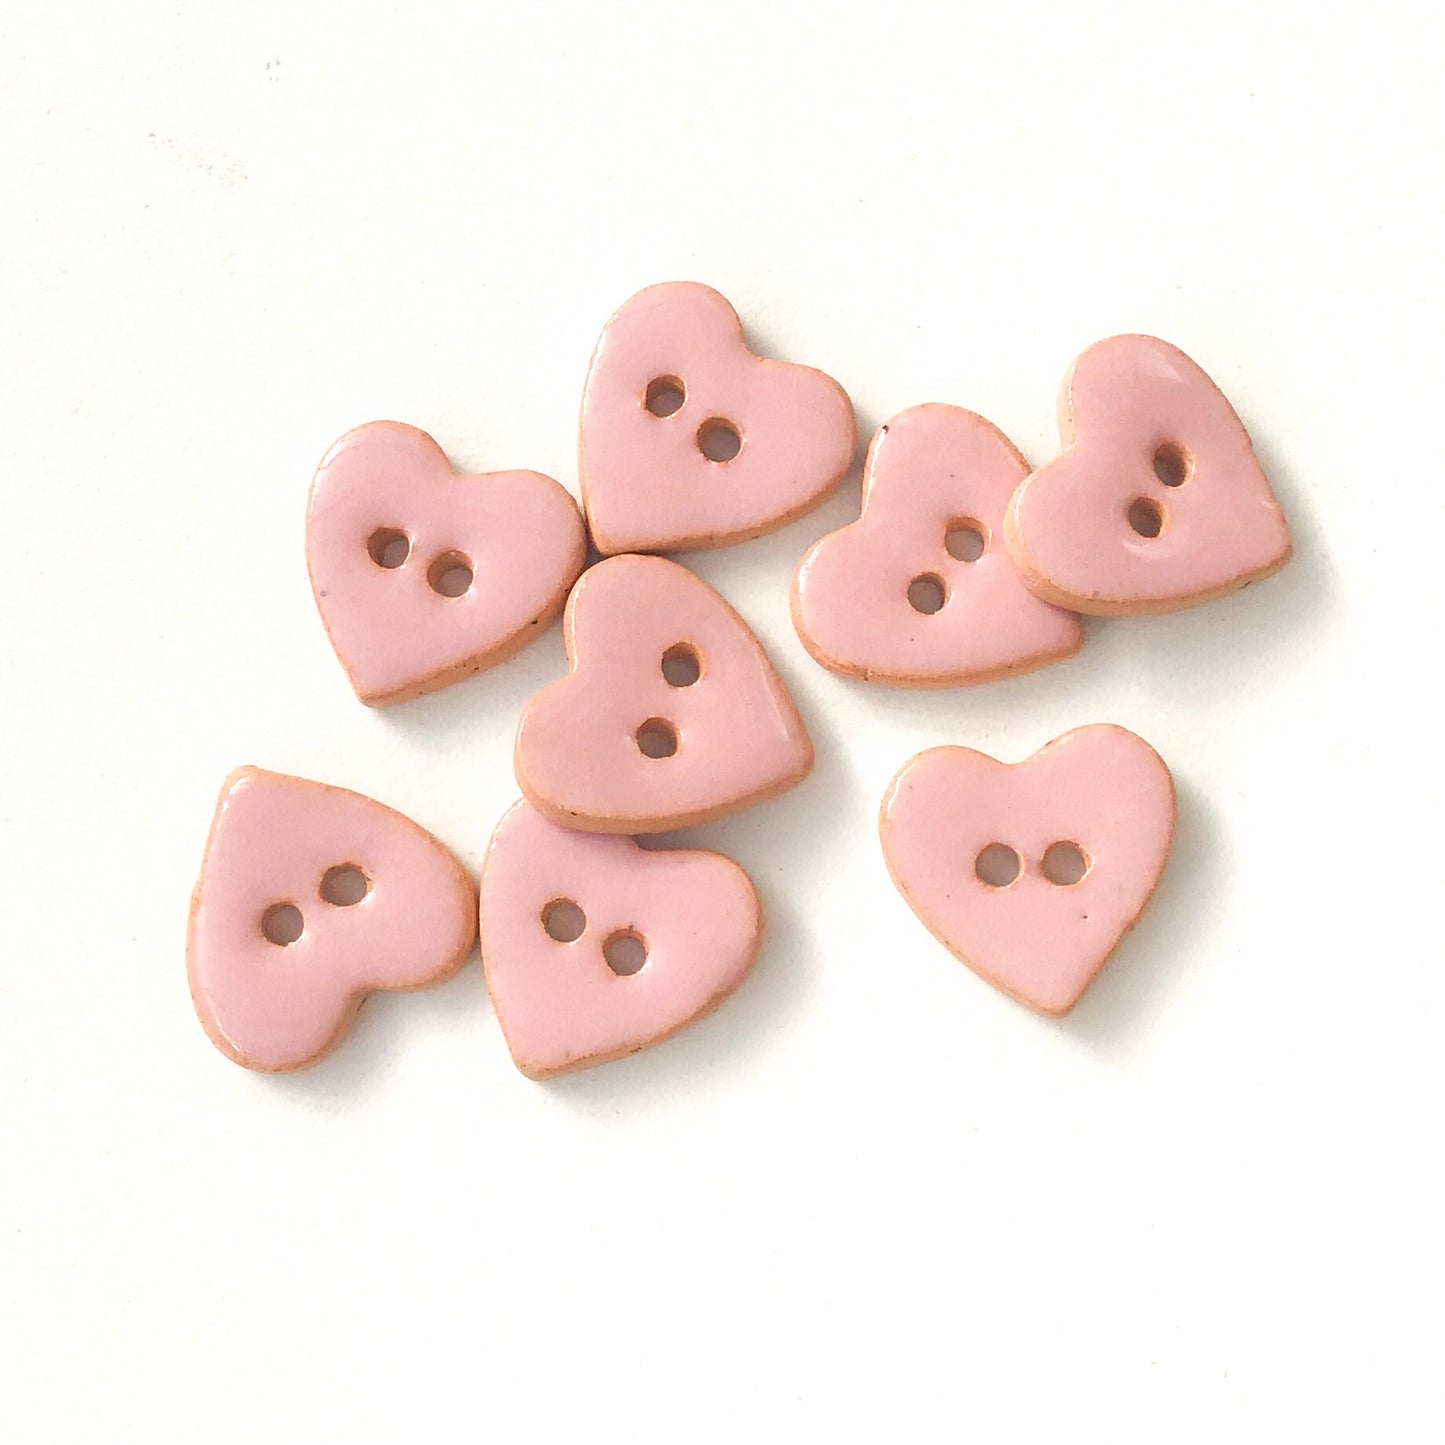 (Wholesale Accounts Only) 5/8" x 9/16" heart - flat - brown clay (ws-196)